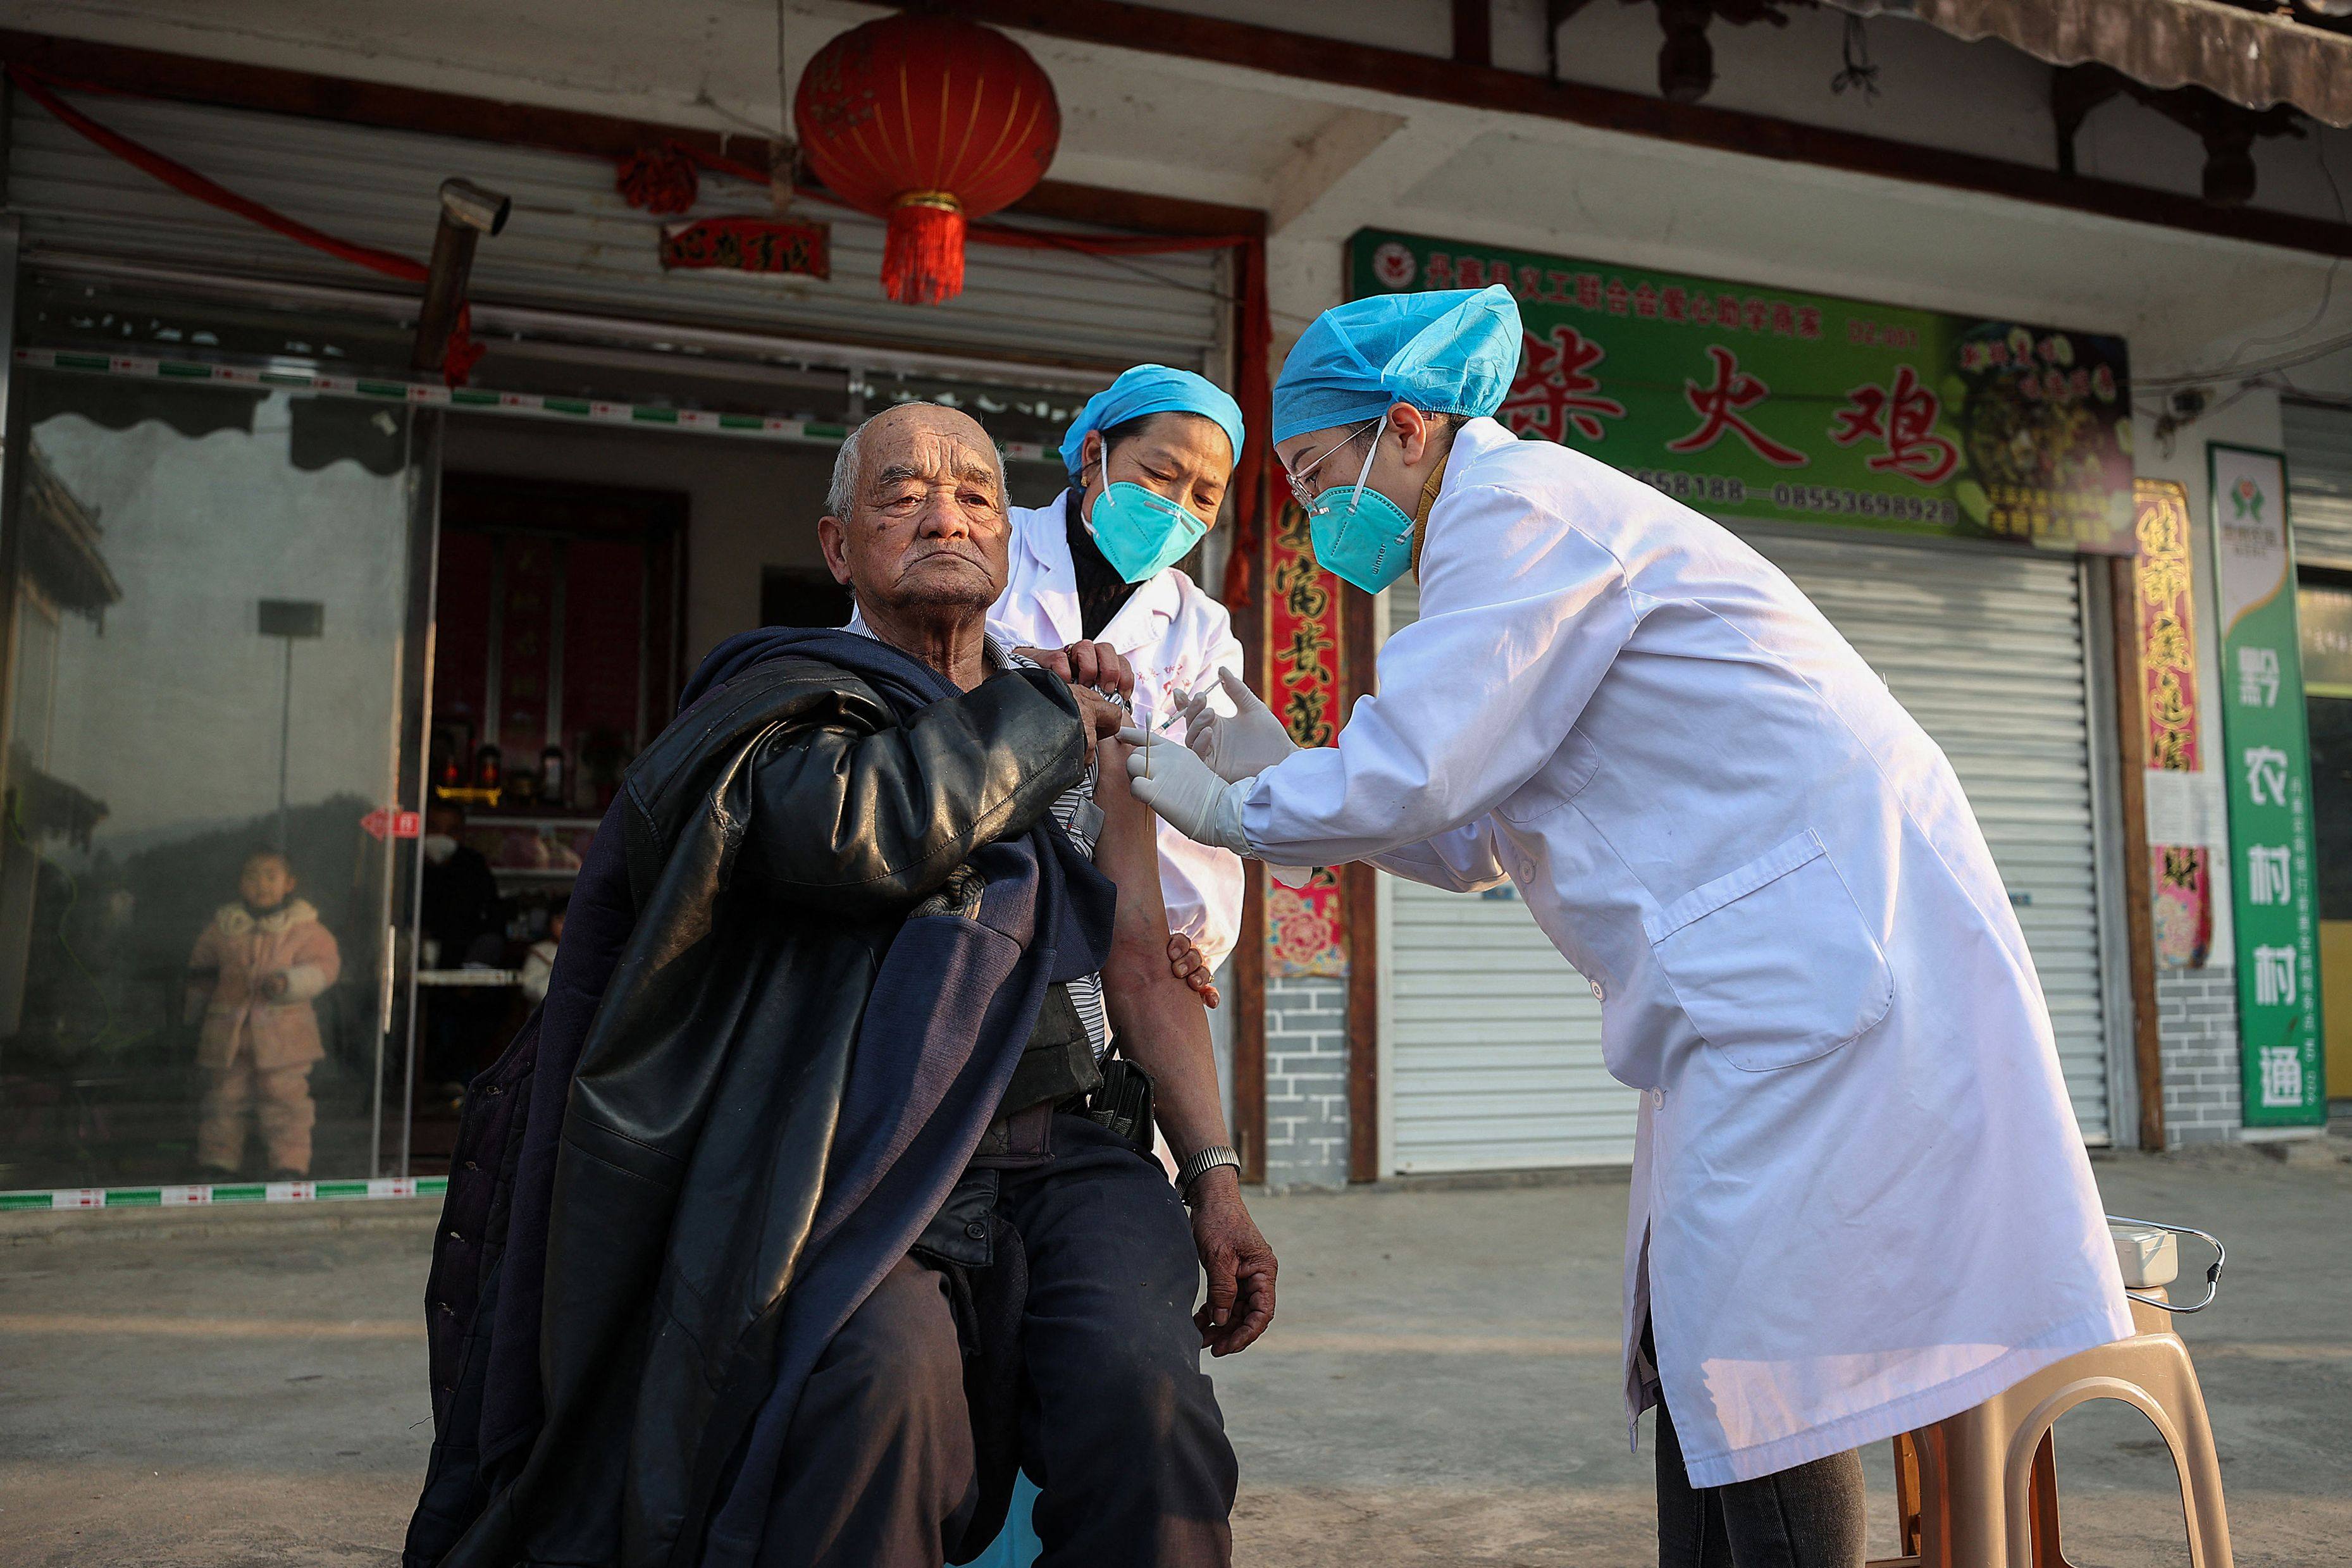 After spending the past year trying to contain the highly transmissible Omicron variant through lockdowns and mass testing, Chinese authorities are again emphasising vaccination. Photo: AFP